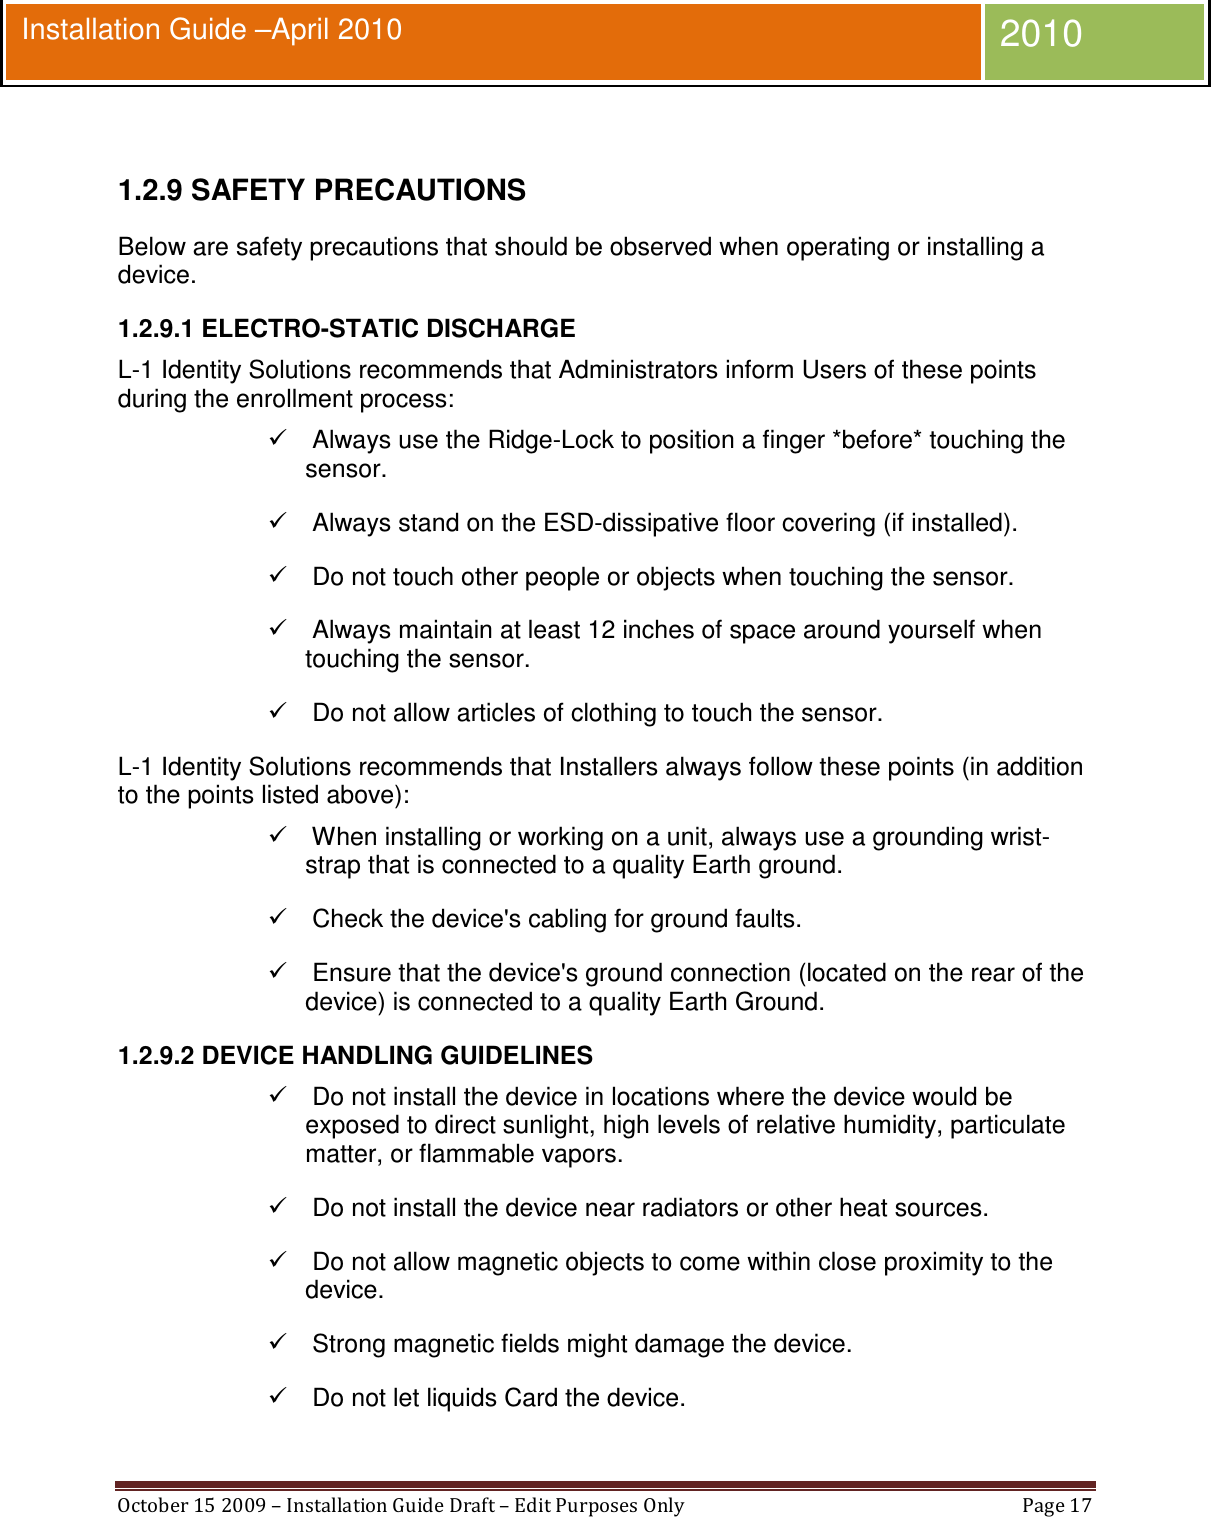  October 15 2009 – Installation Guide Draft – Edit Purposes Only  Page 17  Installation Guide –April 2010 2010  1.2.9 SAFETY PRECAUTIONS Below are safety precautions that should be observed when operating or installing a device. 1.2.9.1 ELECTRO-STATIC DISCHARGE L-1 Identity Solutions recommends that Administrators inform Users of these points during the enrollment process:    Always use the Ridge-Lock to position a finger *before* touching the sensor.    Always stand on the ESD-dissipative floor covering (if installed).    Do not touch other people or objects when touching the sensor.    Always maintain at least 12 inches of space around yourself when touching the sensor.    Do not allow articles of clothing to touch the sensor. L-1 Identity Solutions recommends that Installers always follow these points (in addition to the points listed above):    When installing or working on a unit, always use a grounding wrist-strap that is connected to a quality Earth ground.    Check the device&apos;s cabling for ground faults.    Ensure that the device&apos;s ground connection (located on the rear of the device) is connected to a quality Earth Ground. 1.2.9.2 DEVICE HANDLING GUIDELINES    Do not install the device in locations where the device would be exposed to direct sunlight, high levels of relative humidity, particulate matter, or flammable vapors.    Do not install the device near radiators or other heat sources.    Do not allow magnetic objects to come within close proximity to the device.    Strong magnetic fields might damage the device.    Do not let liquids Card the device. 